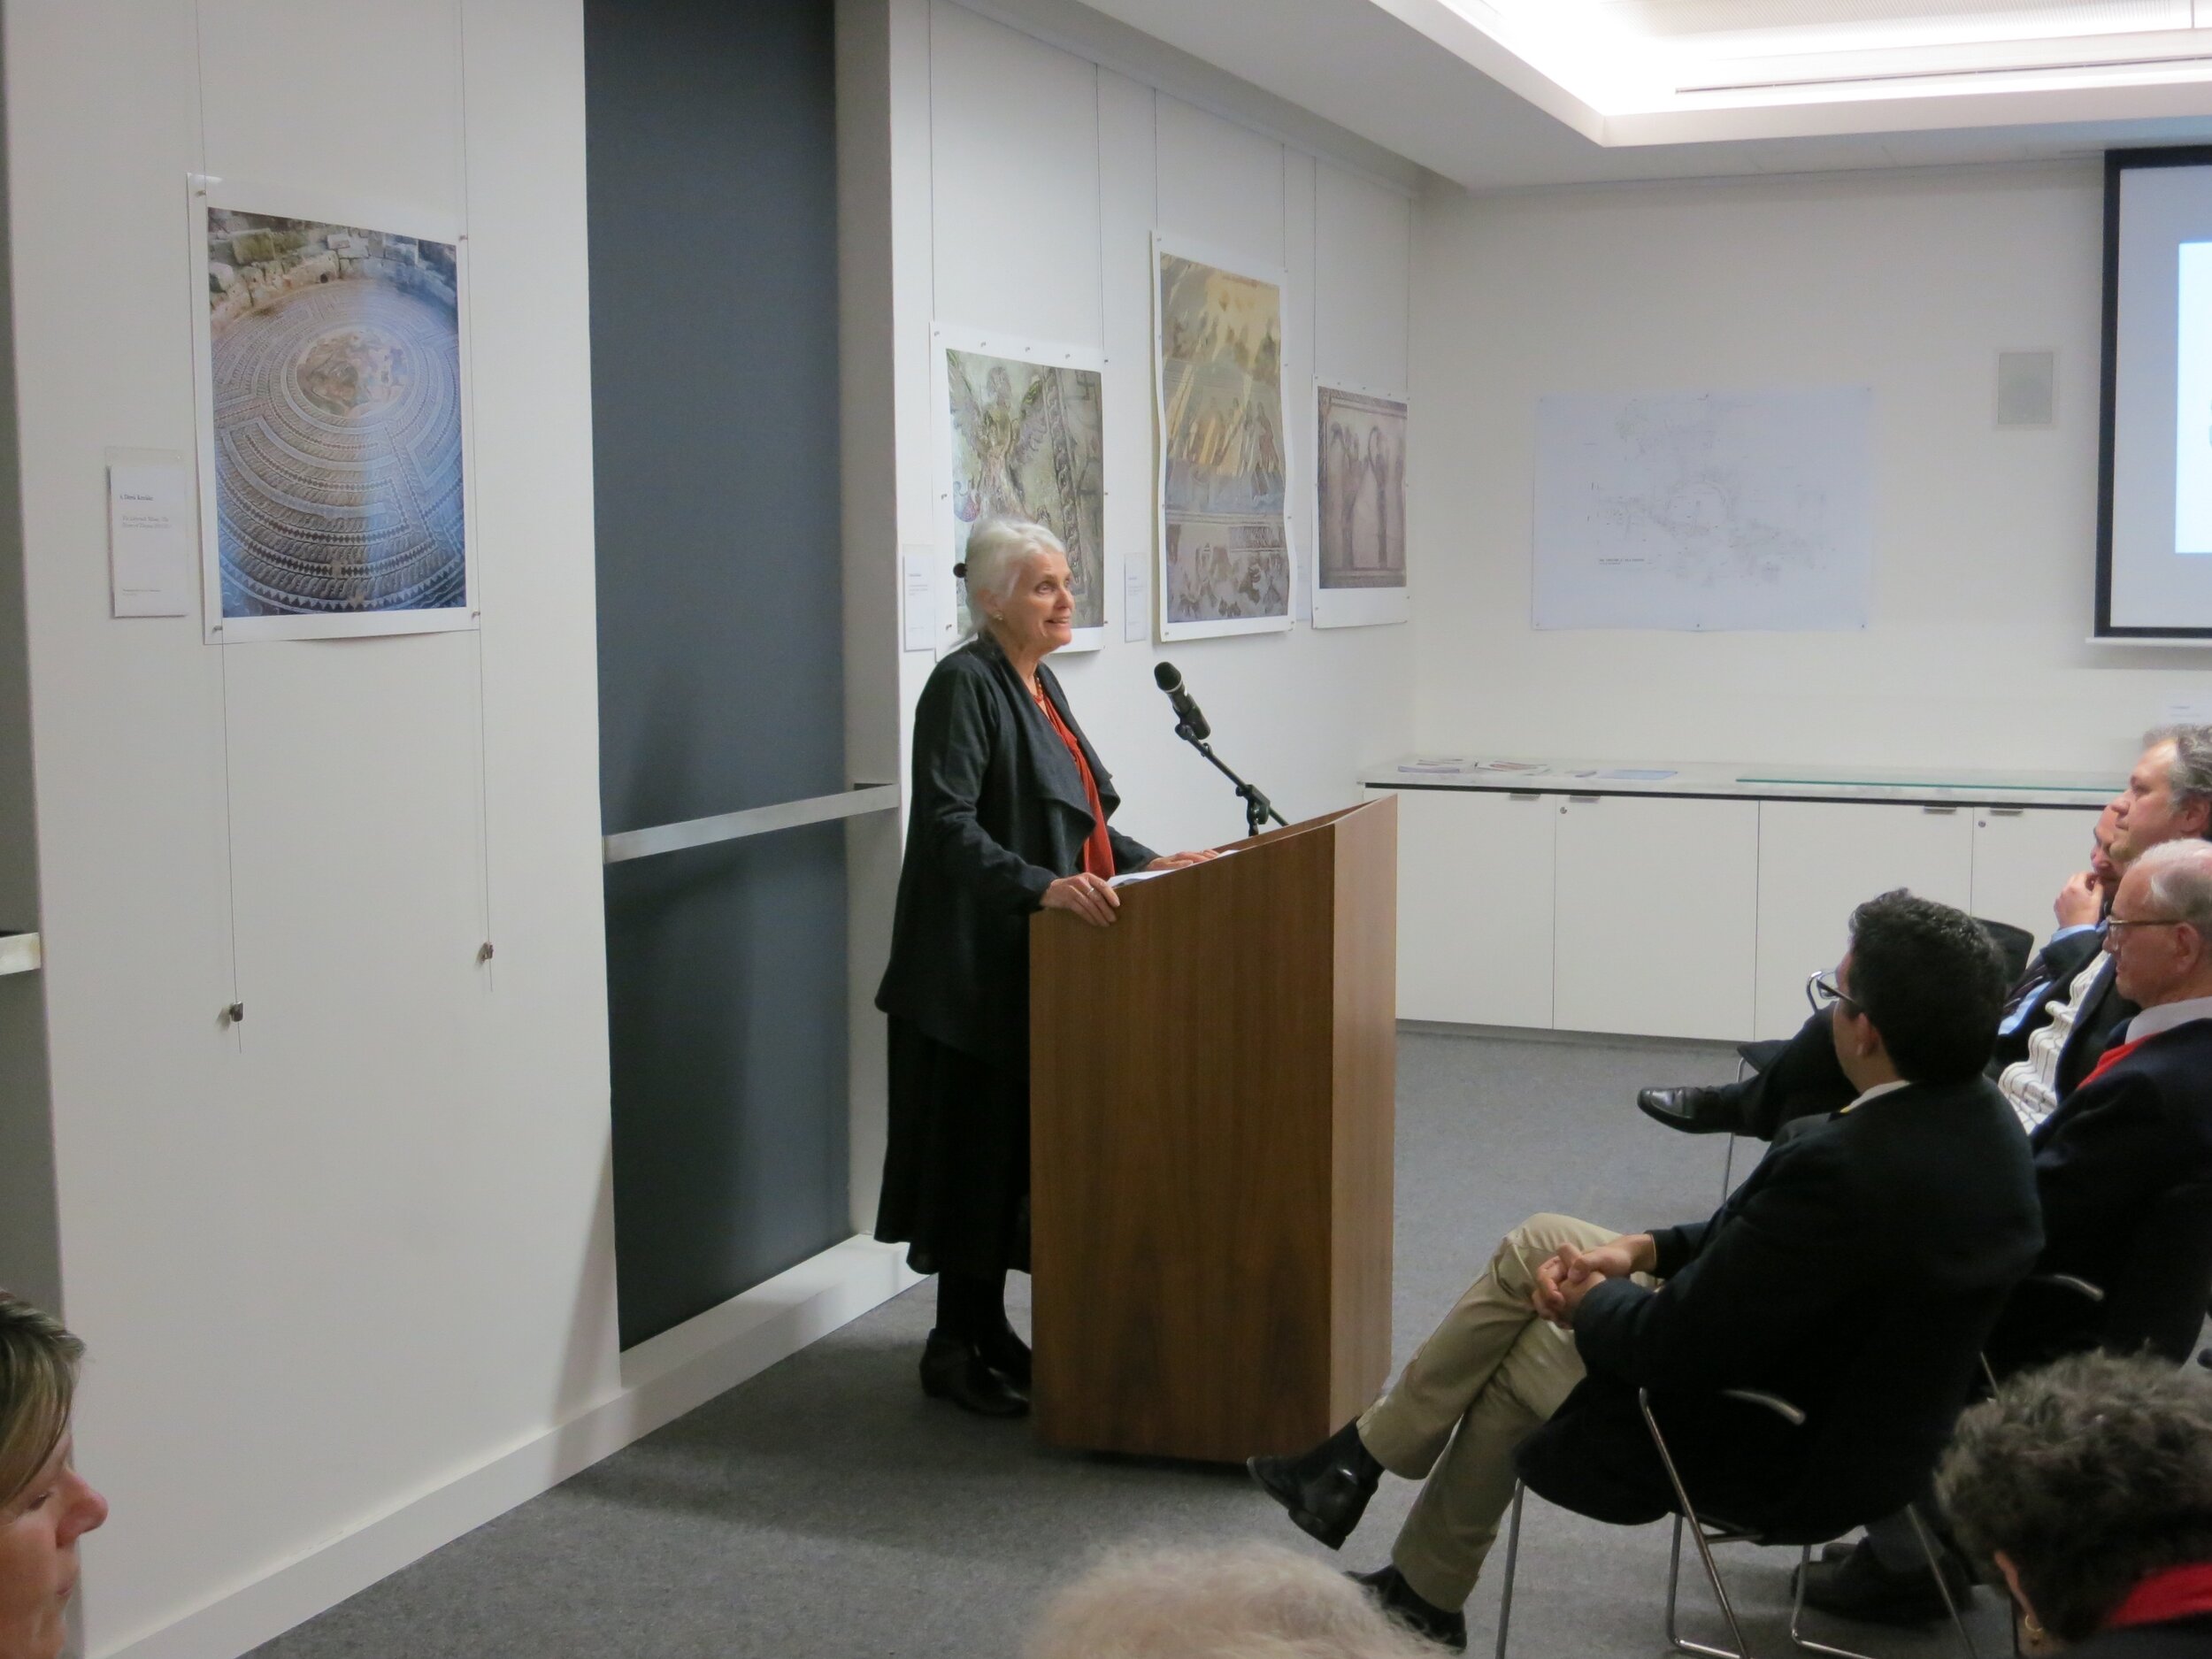  Prof.  Diana Wood Conroy  speaking at the opening of  Response to Cyprus,  10 July 2013. The event was hosted by the Australian Archaeological Institute at Athens (AAIA) at the Centre of Classical and Near Eastern Studies of Australia (CCANESA). Wor